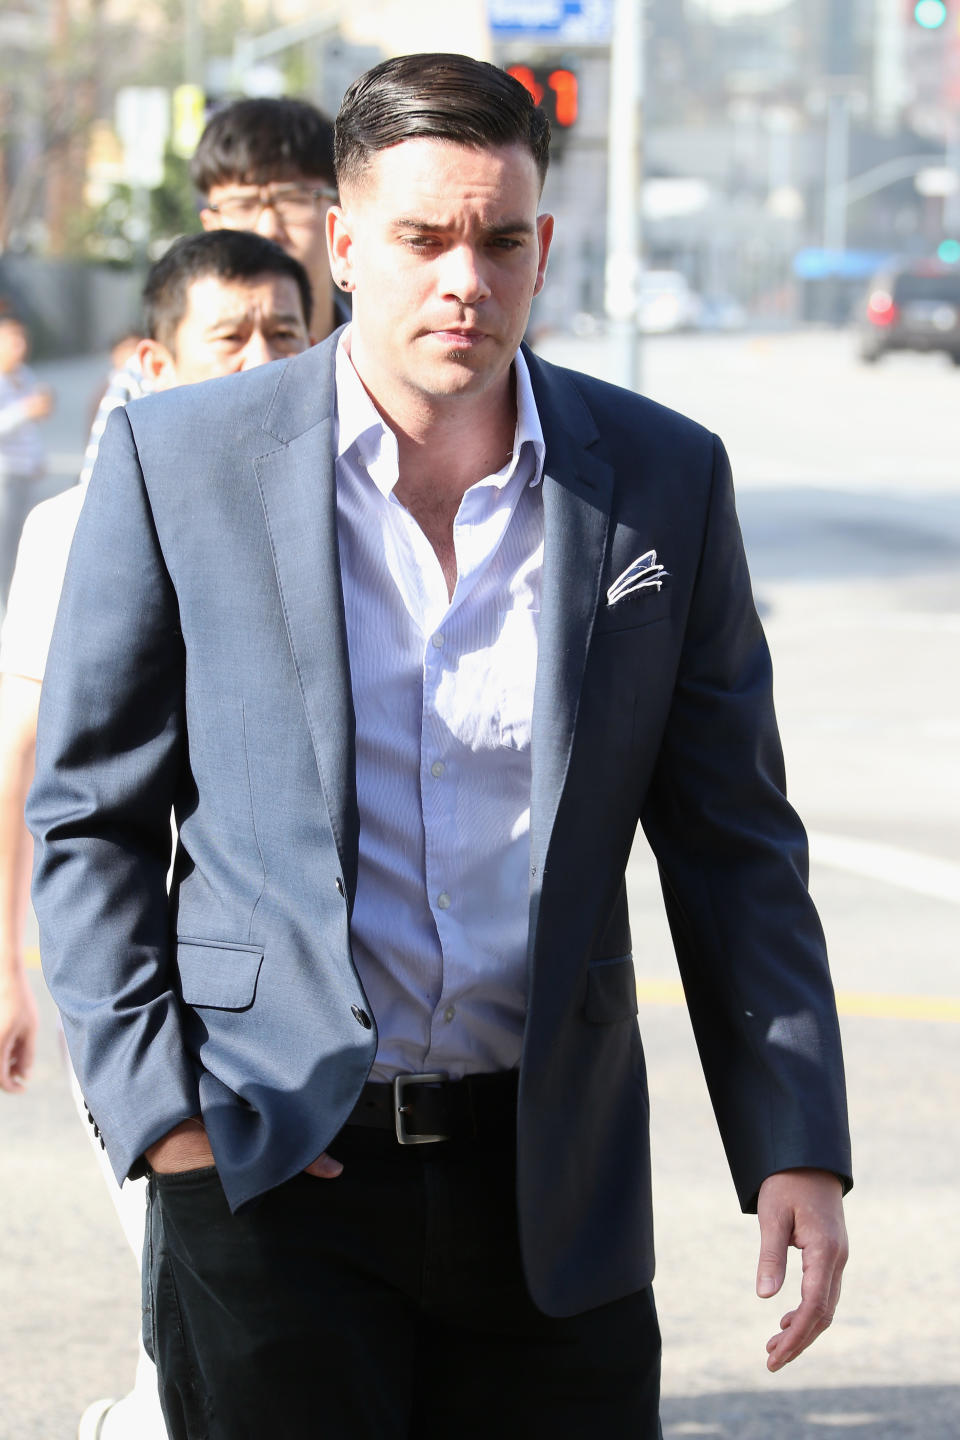 Mark Salling arrives for a court appearance on June 3, 2016. (Photo: Getty Images)